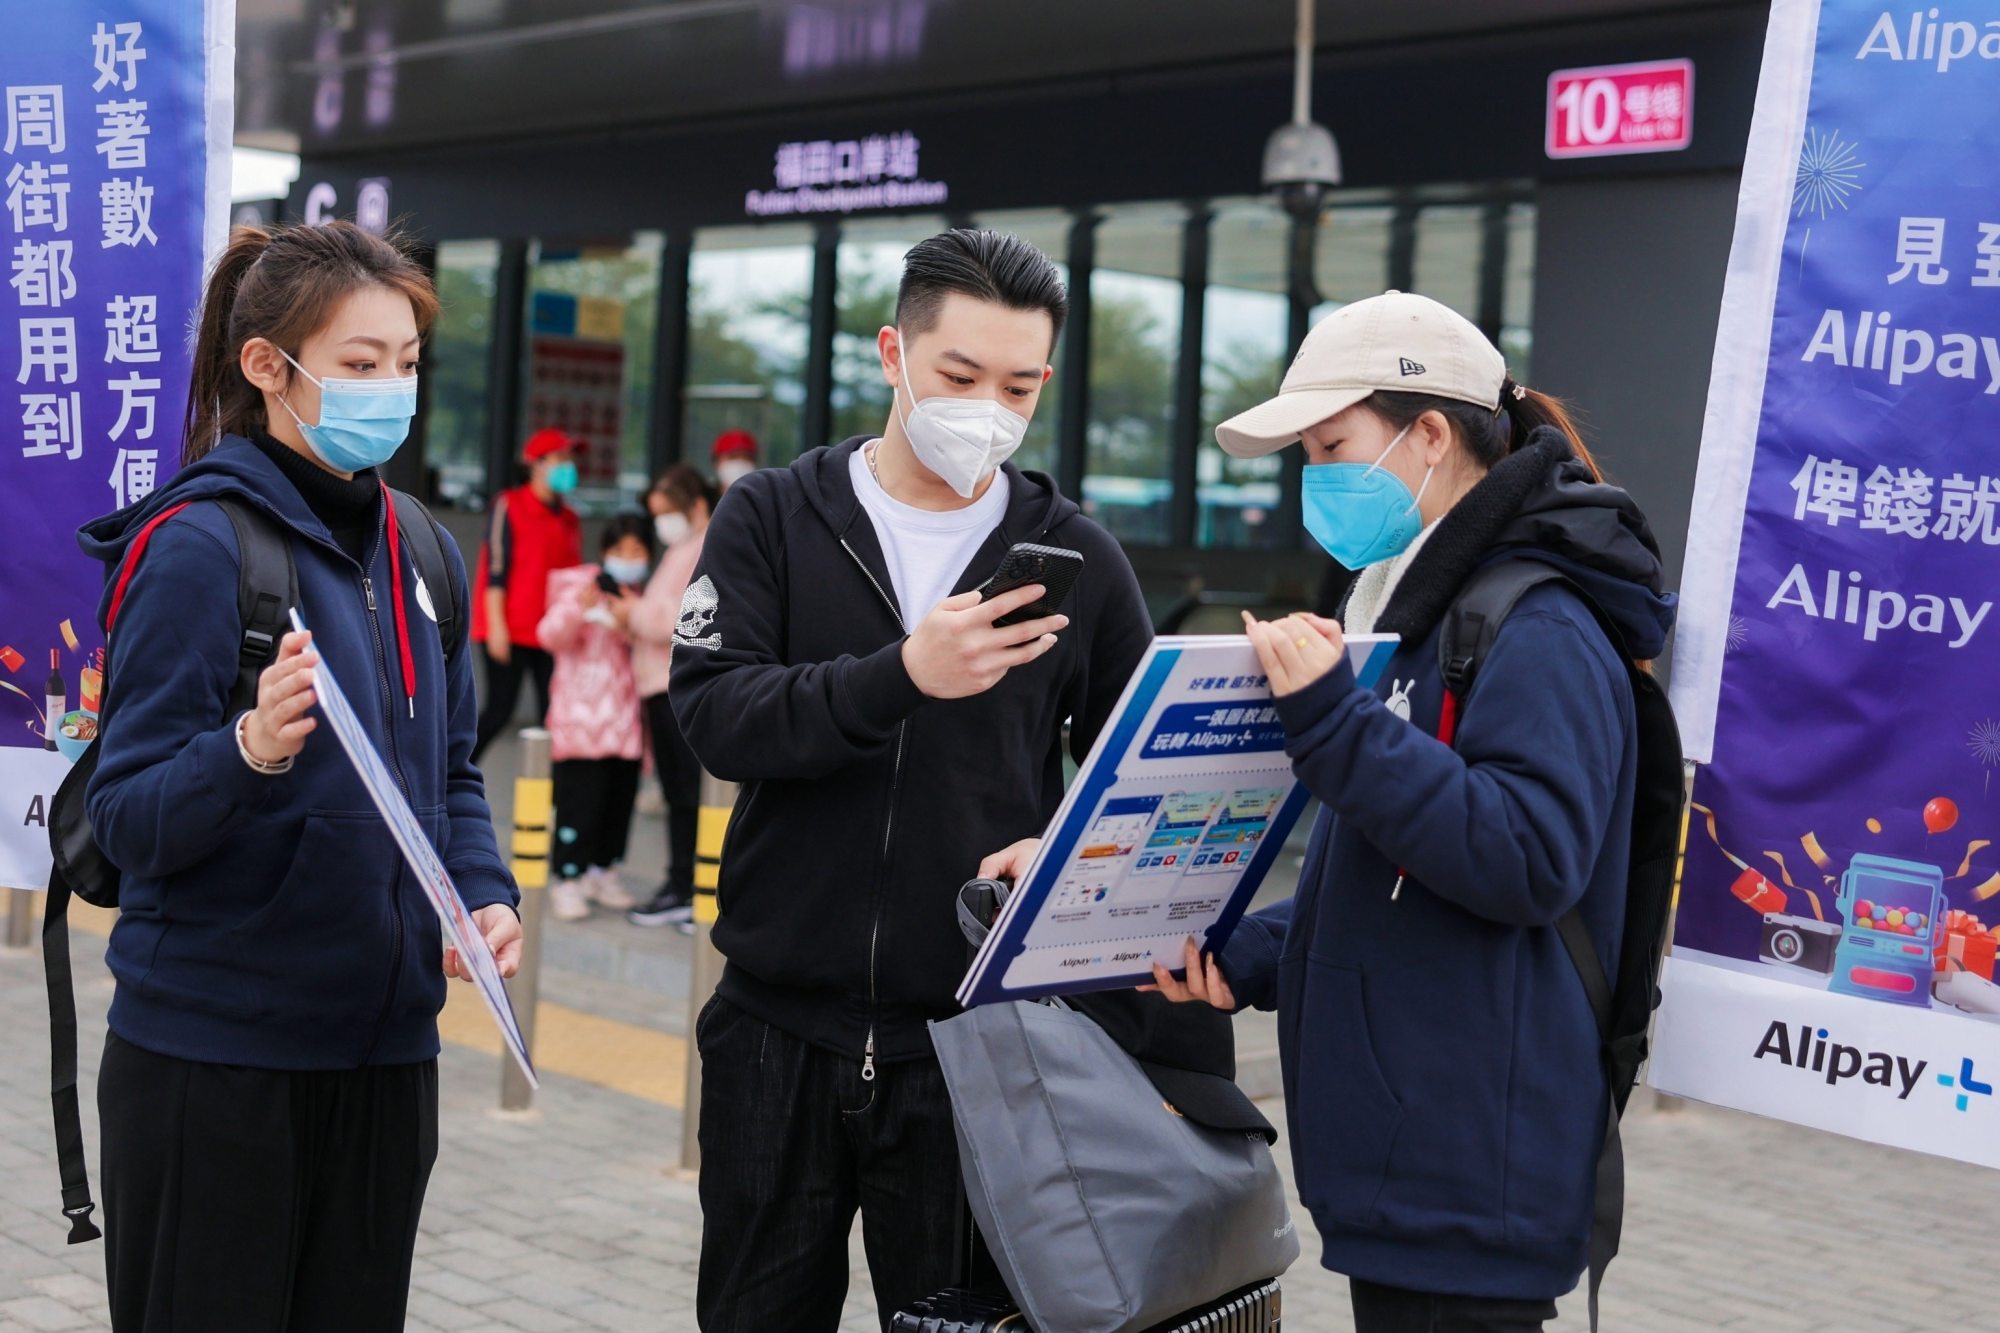 Alipay+ has been actively promoting QR code connectivity in Hong Kong, South Korea and major markets across Southeast Asia. Photo: Handout